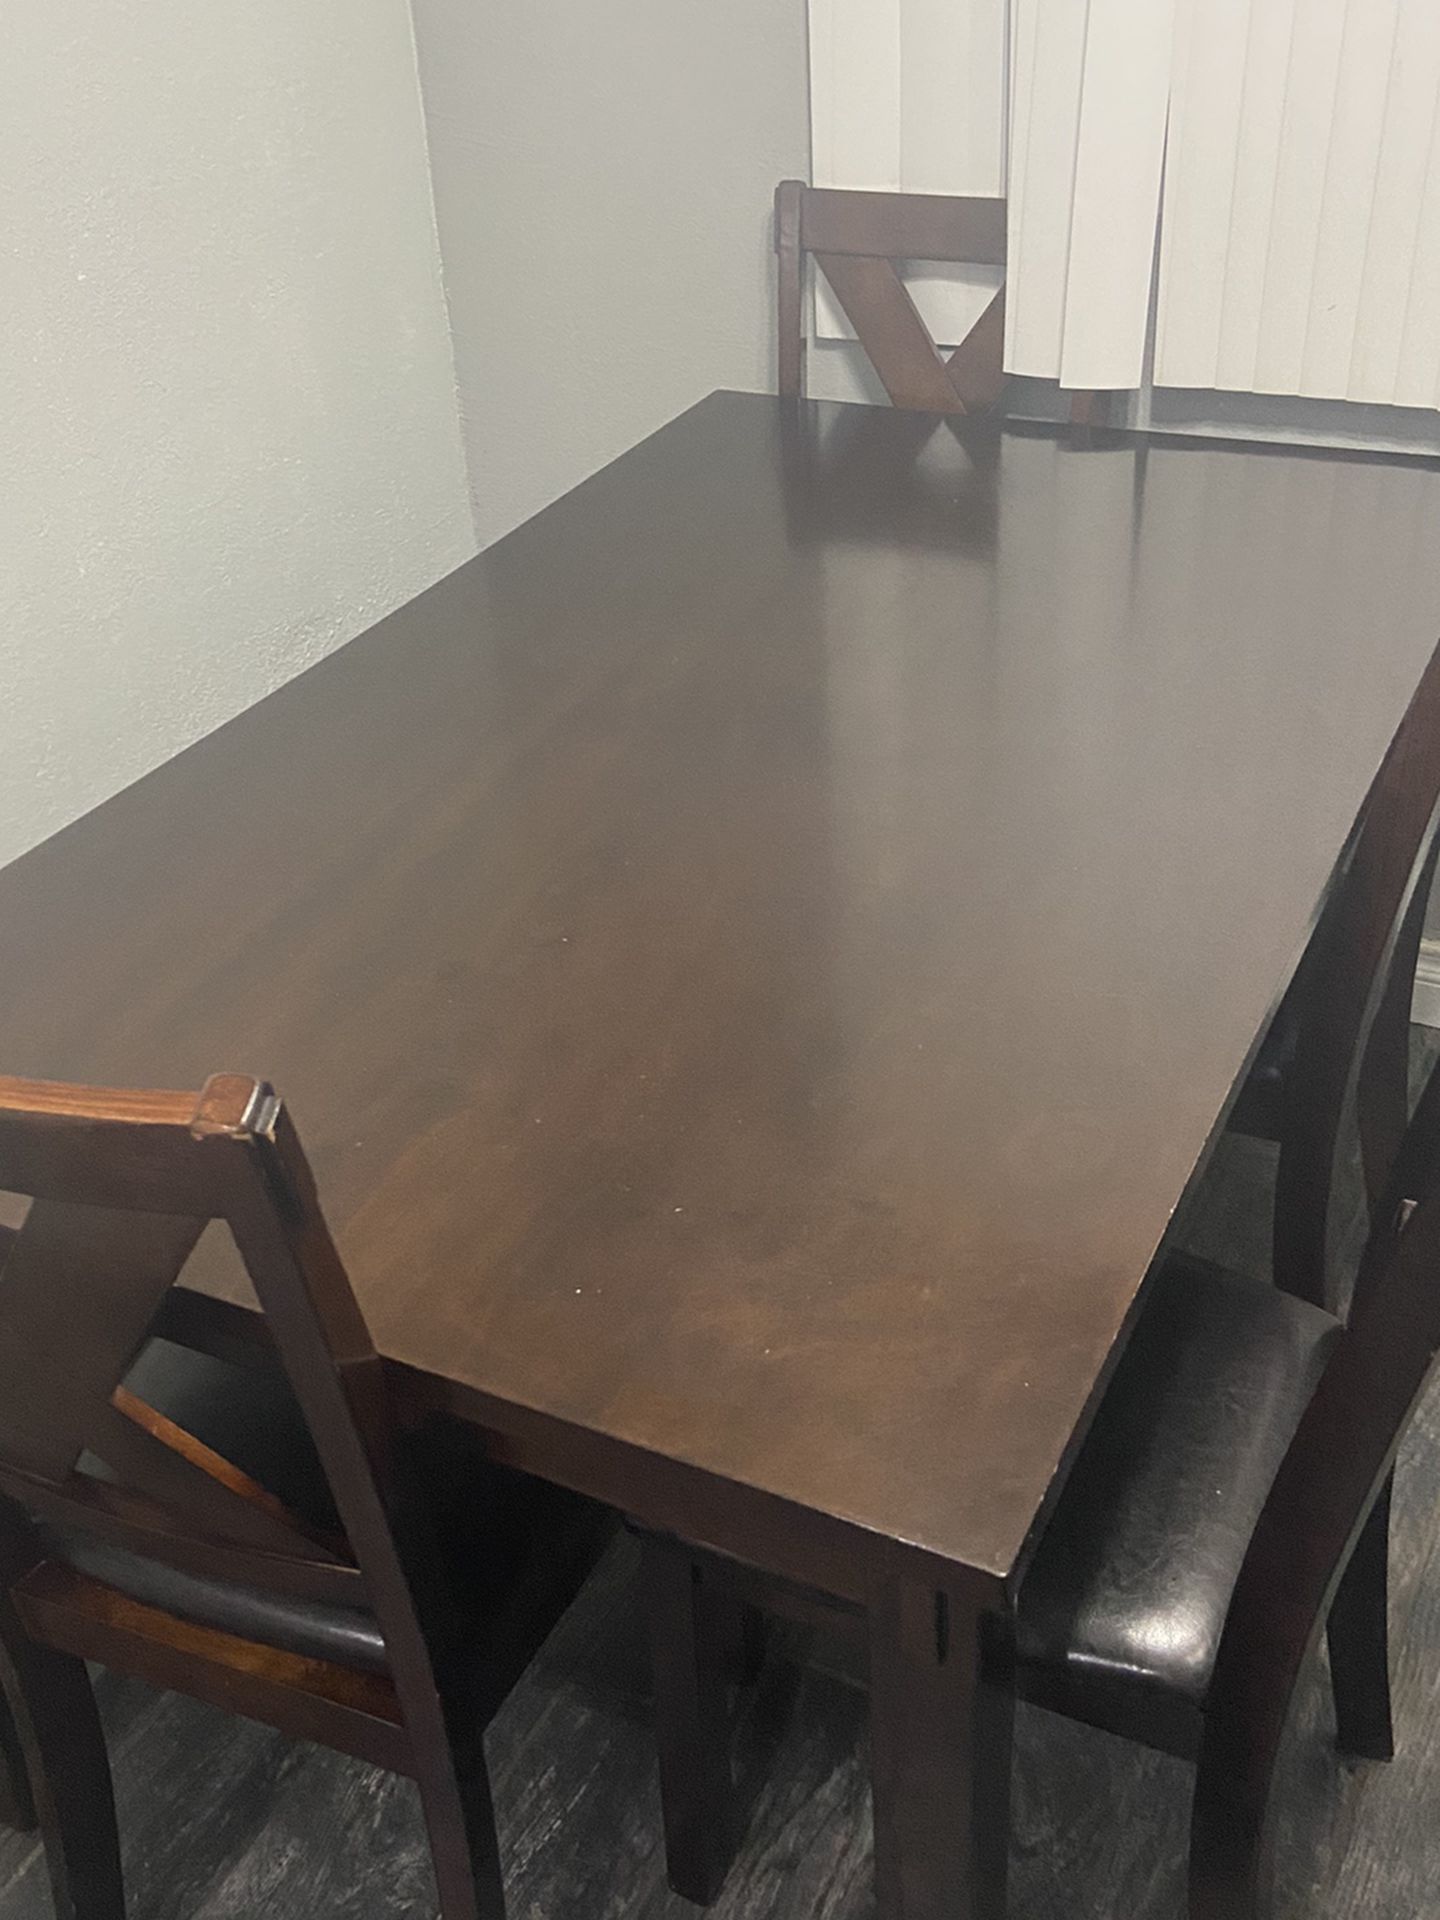 Dining Set-4 Chairs, Table, and Bench